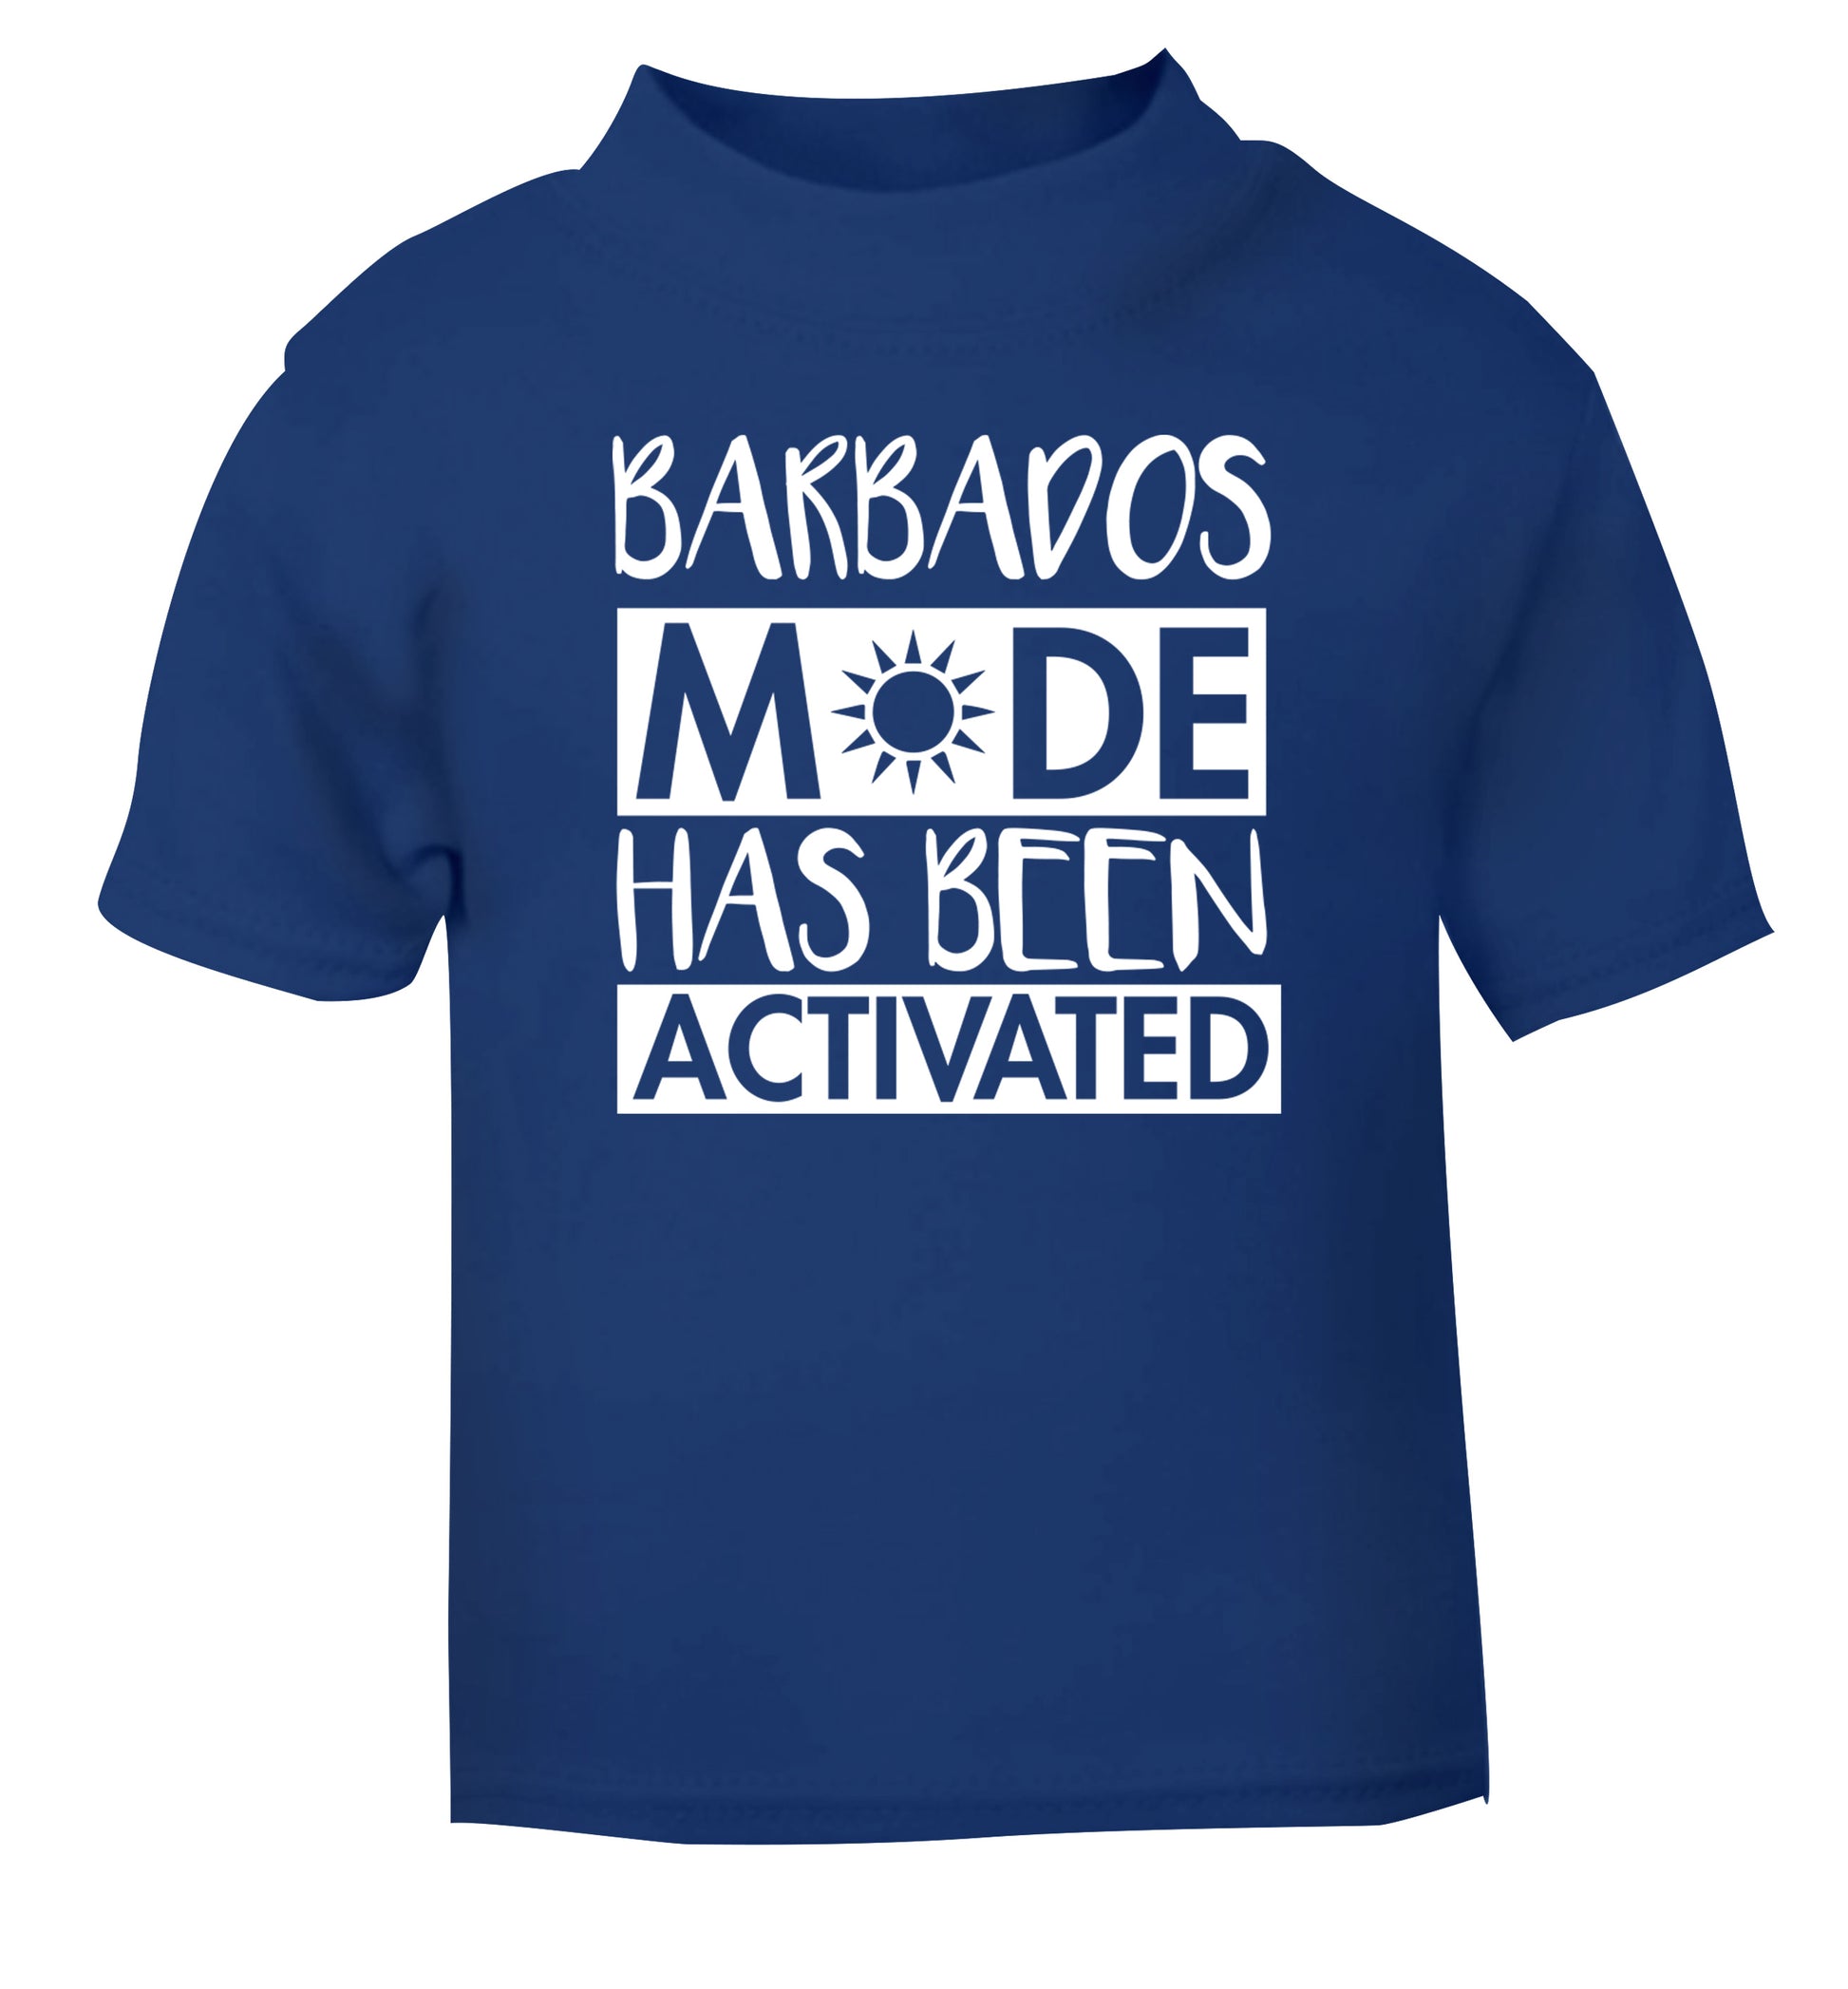 Barbados mode has been activated blue Baby Toddler Tshirt 2 Years